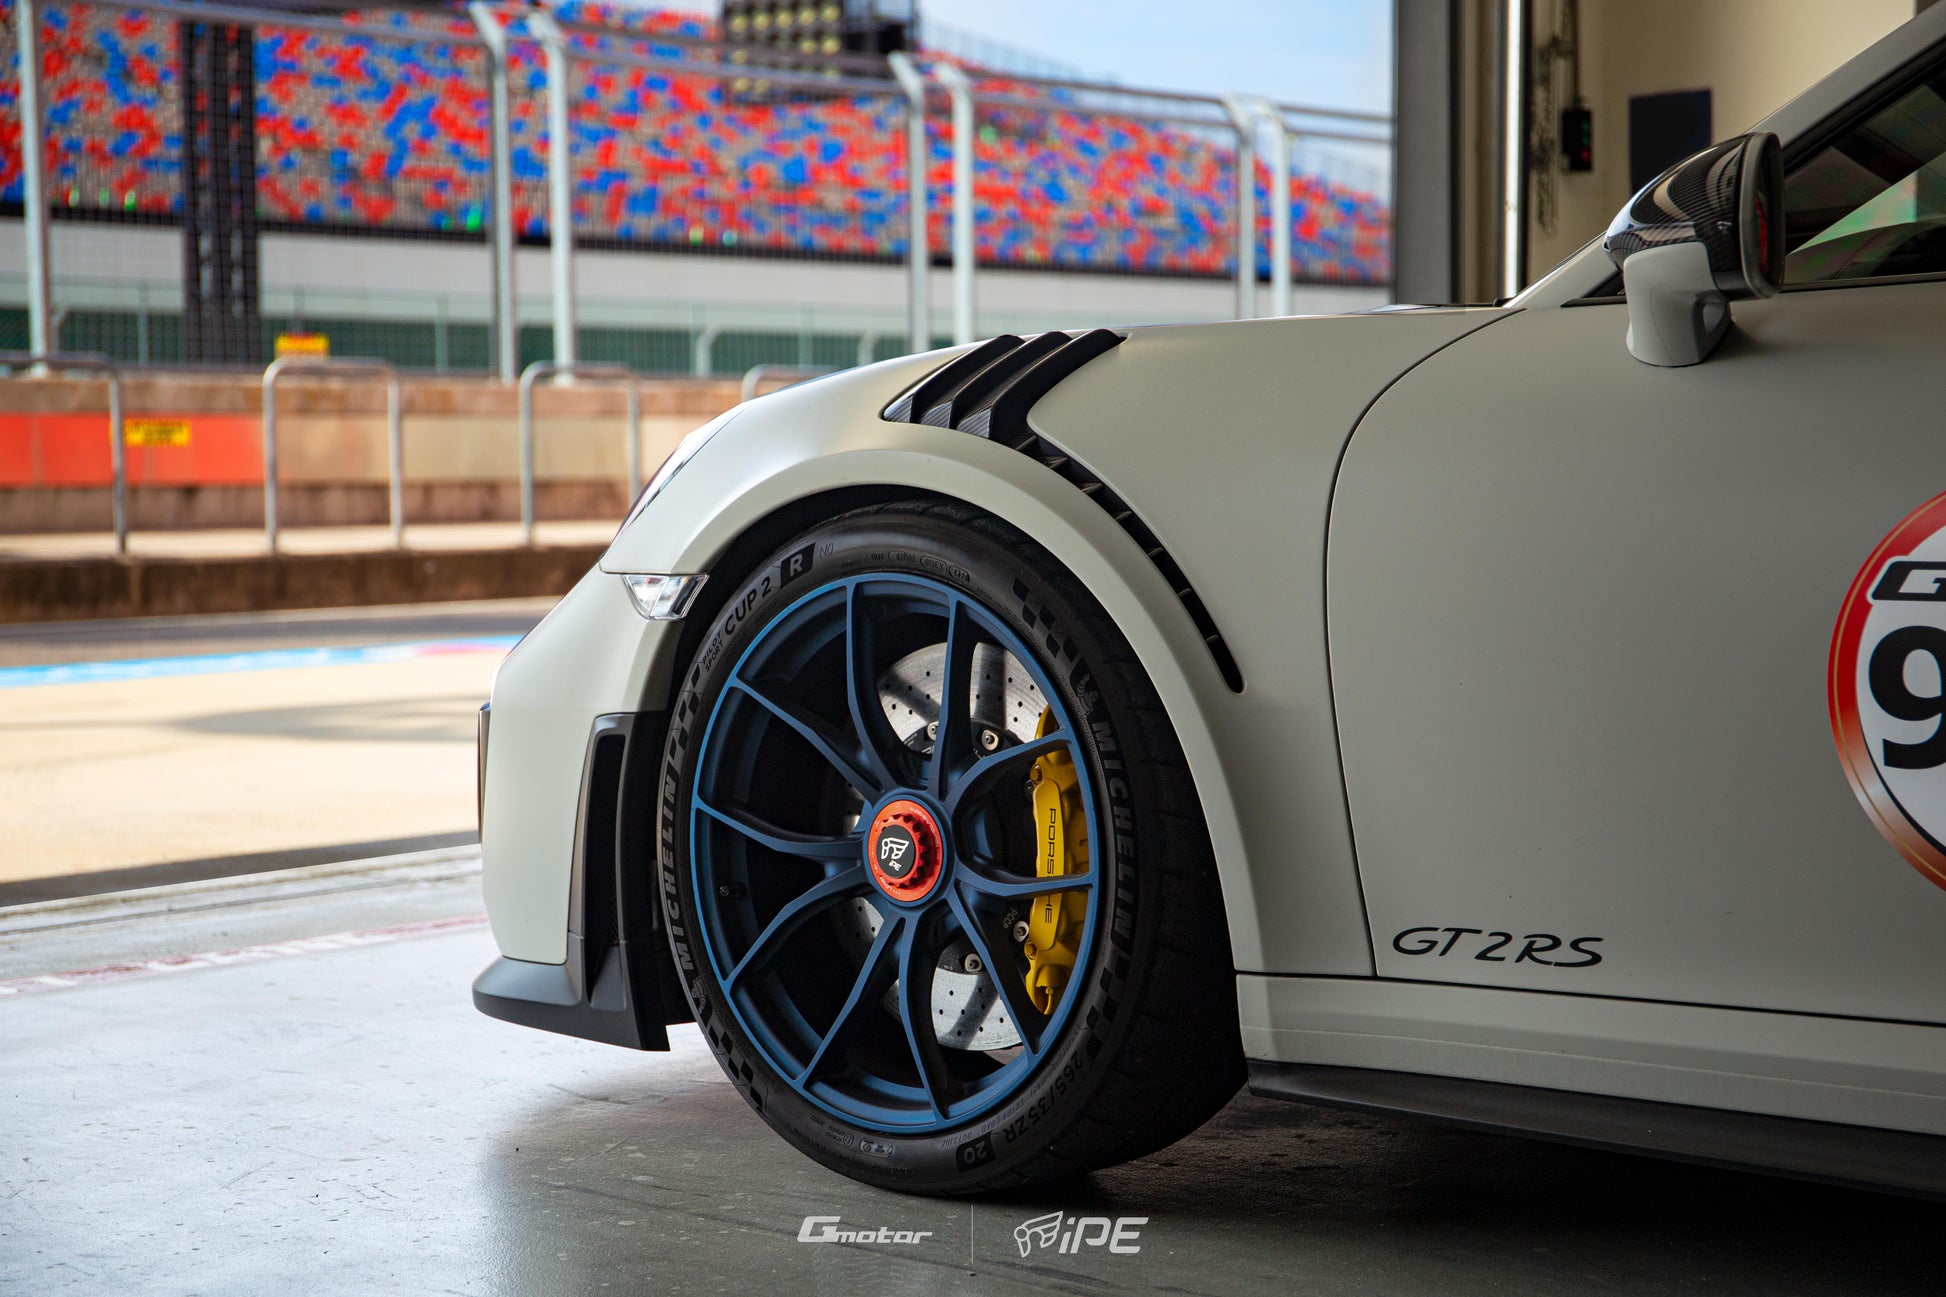 Nearside front view of a grey Porsche GT2 RS with a blue IPE MFR-01 Magnesium wheel fitted, inside the pit garage facing out to the pitlane at a race track